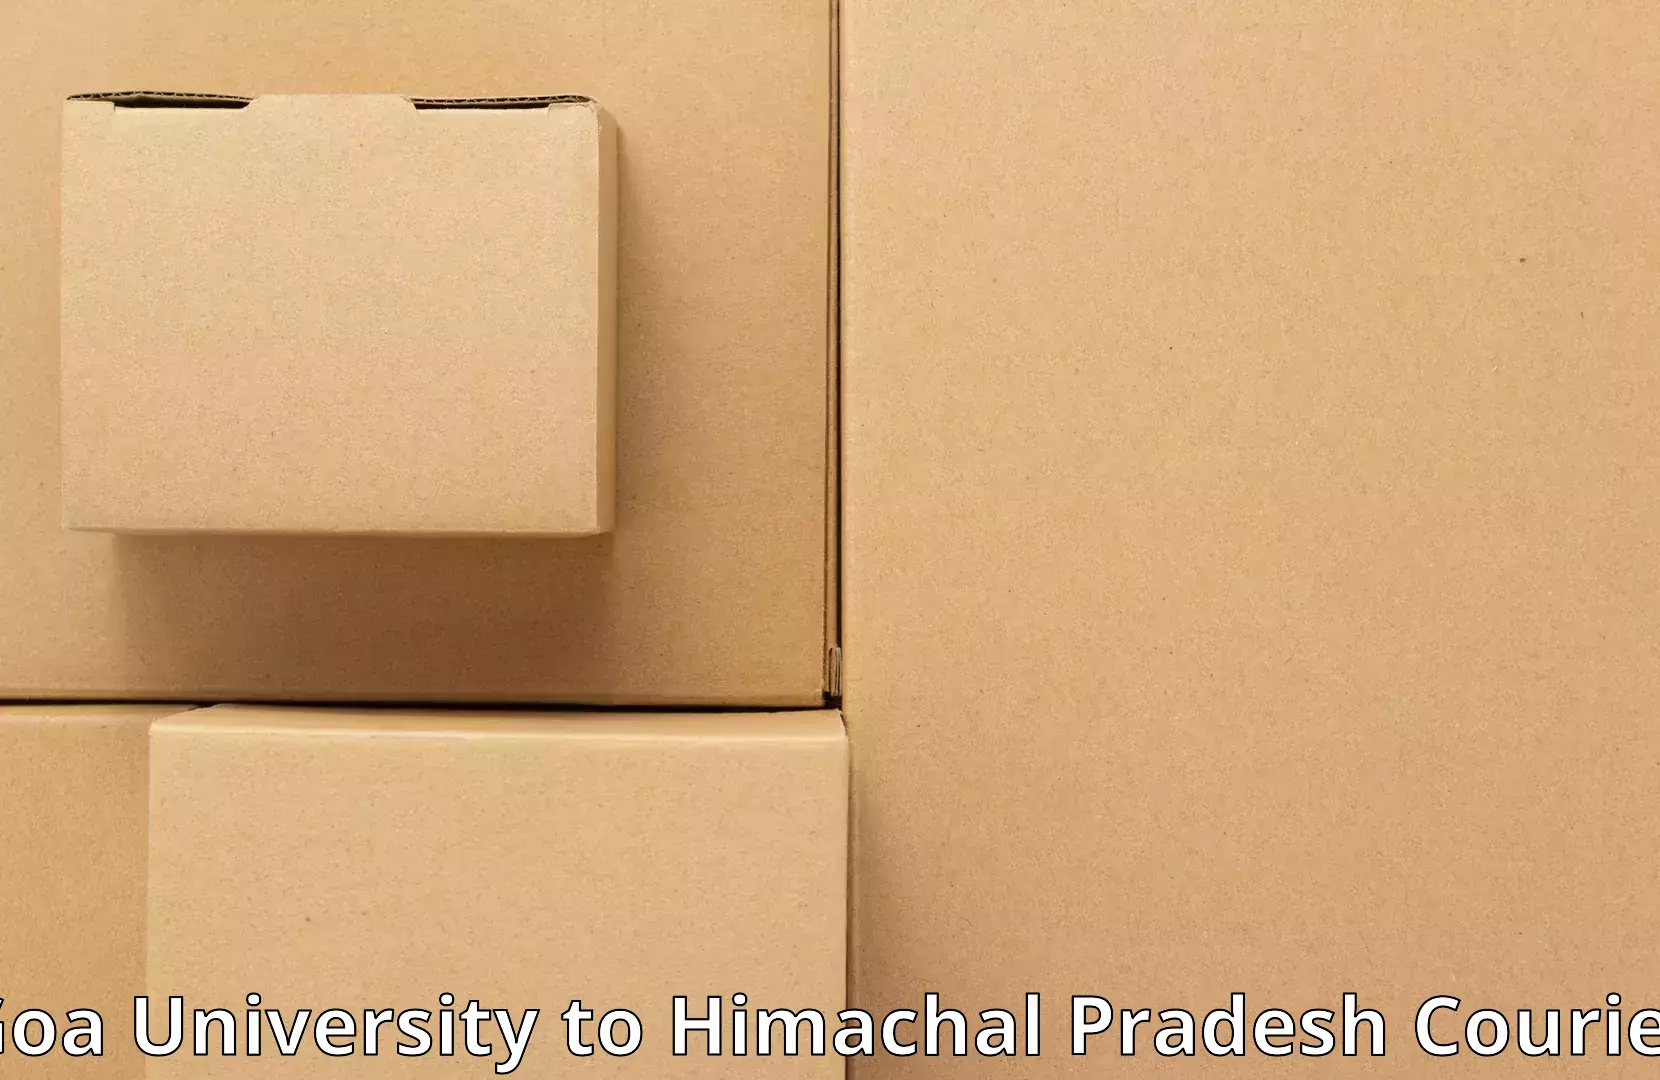 Affordable household movers in Goa University to Una